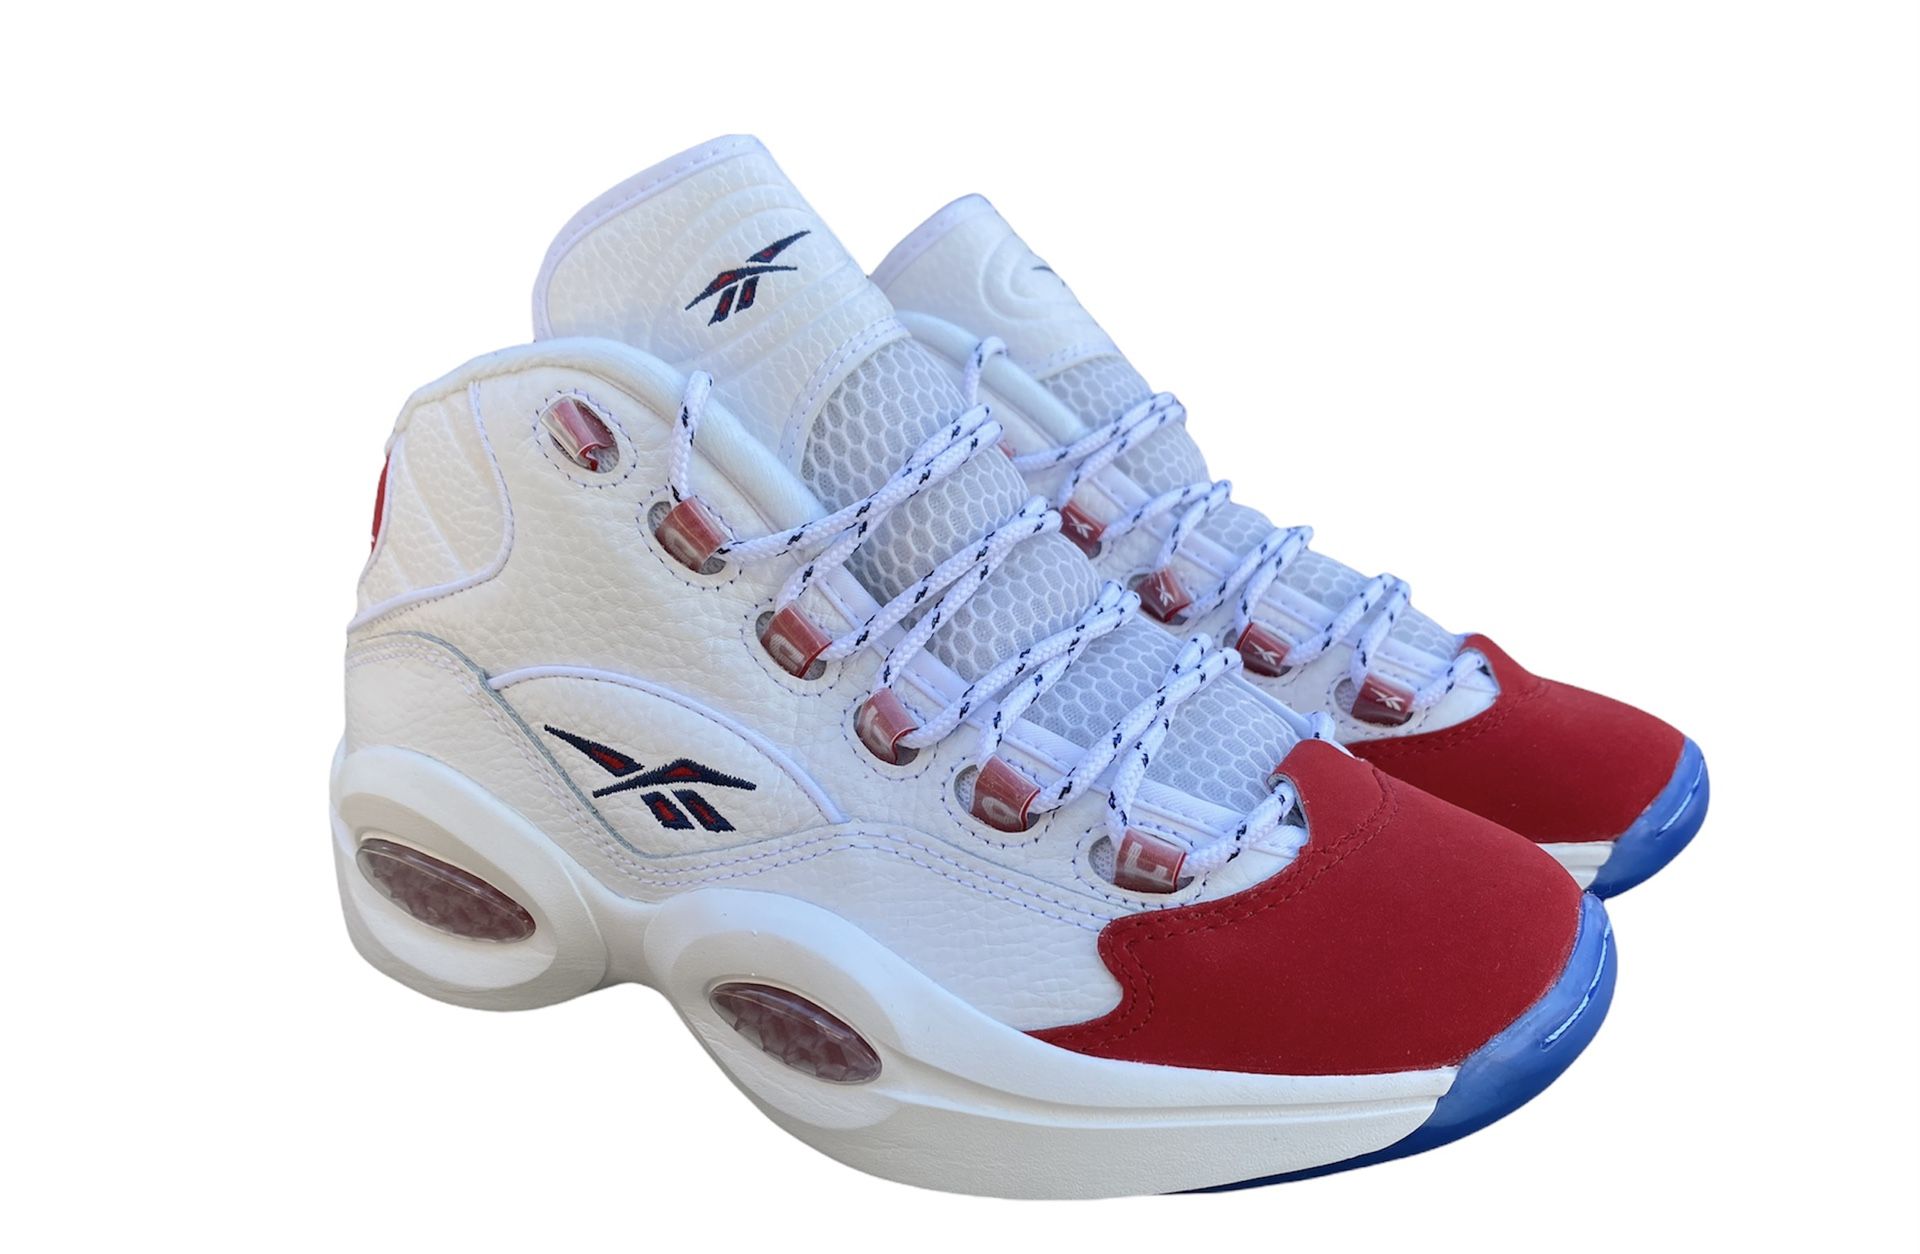 Reebok Allen Iverson Question Red Toe 25th Anniversary GS Size 7